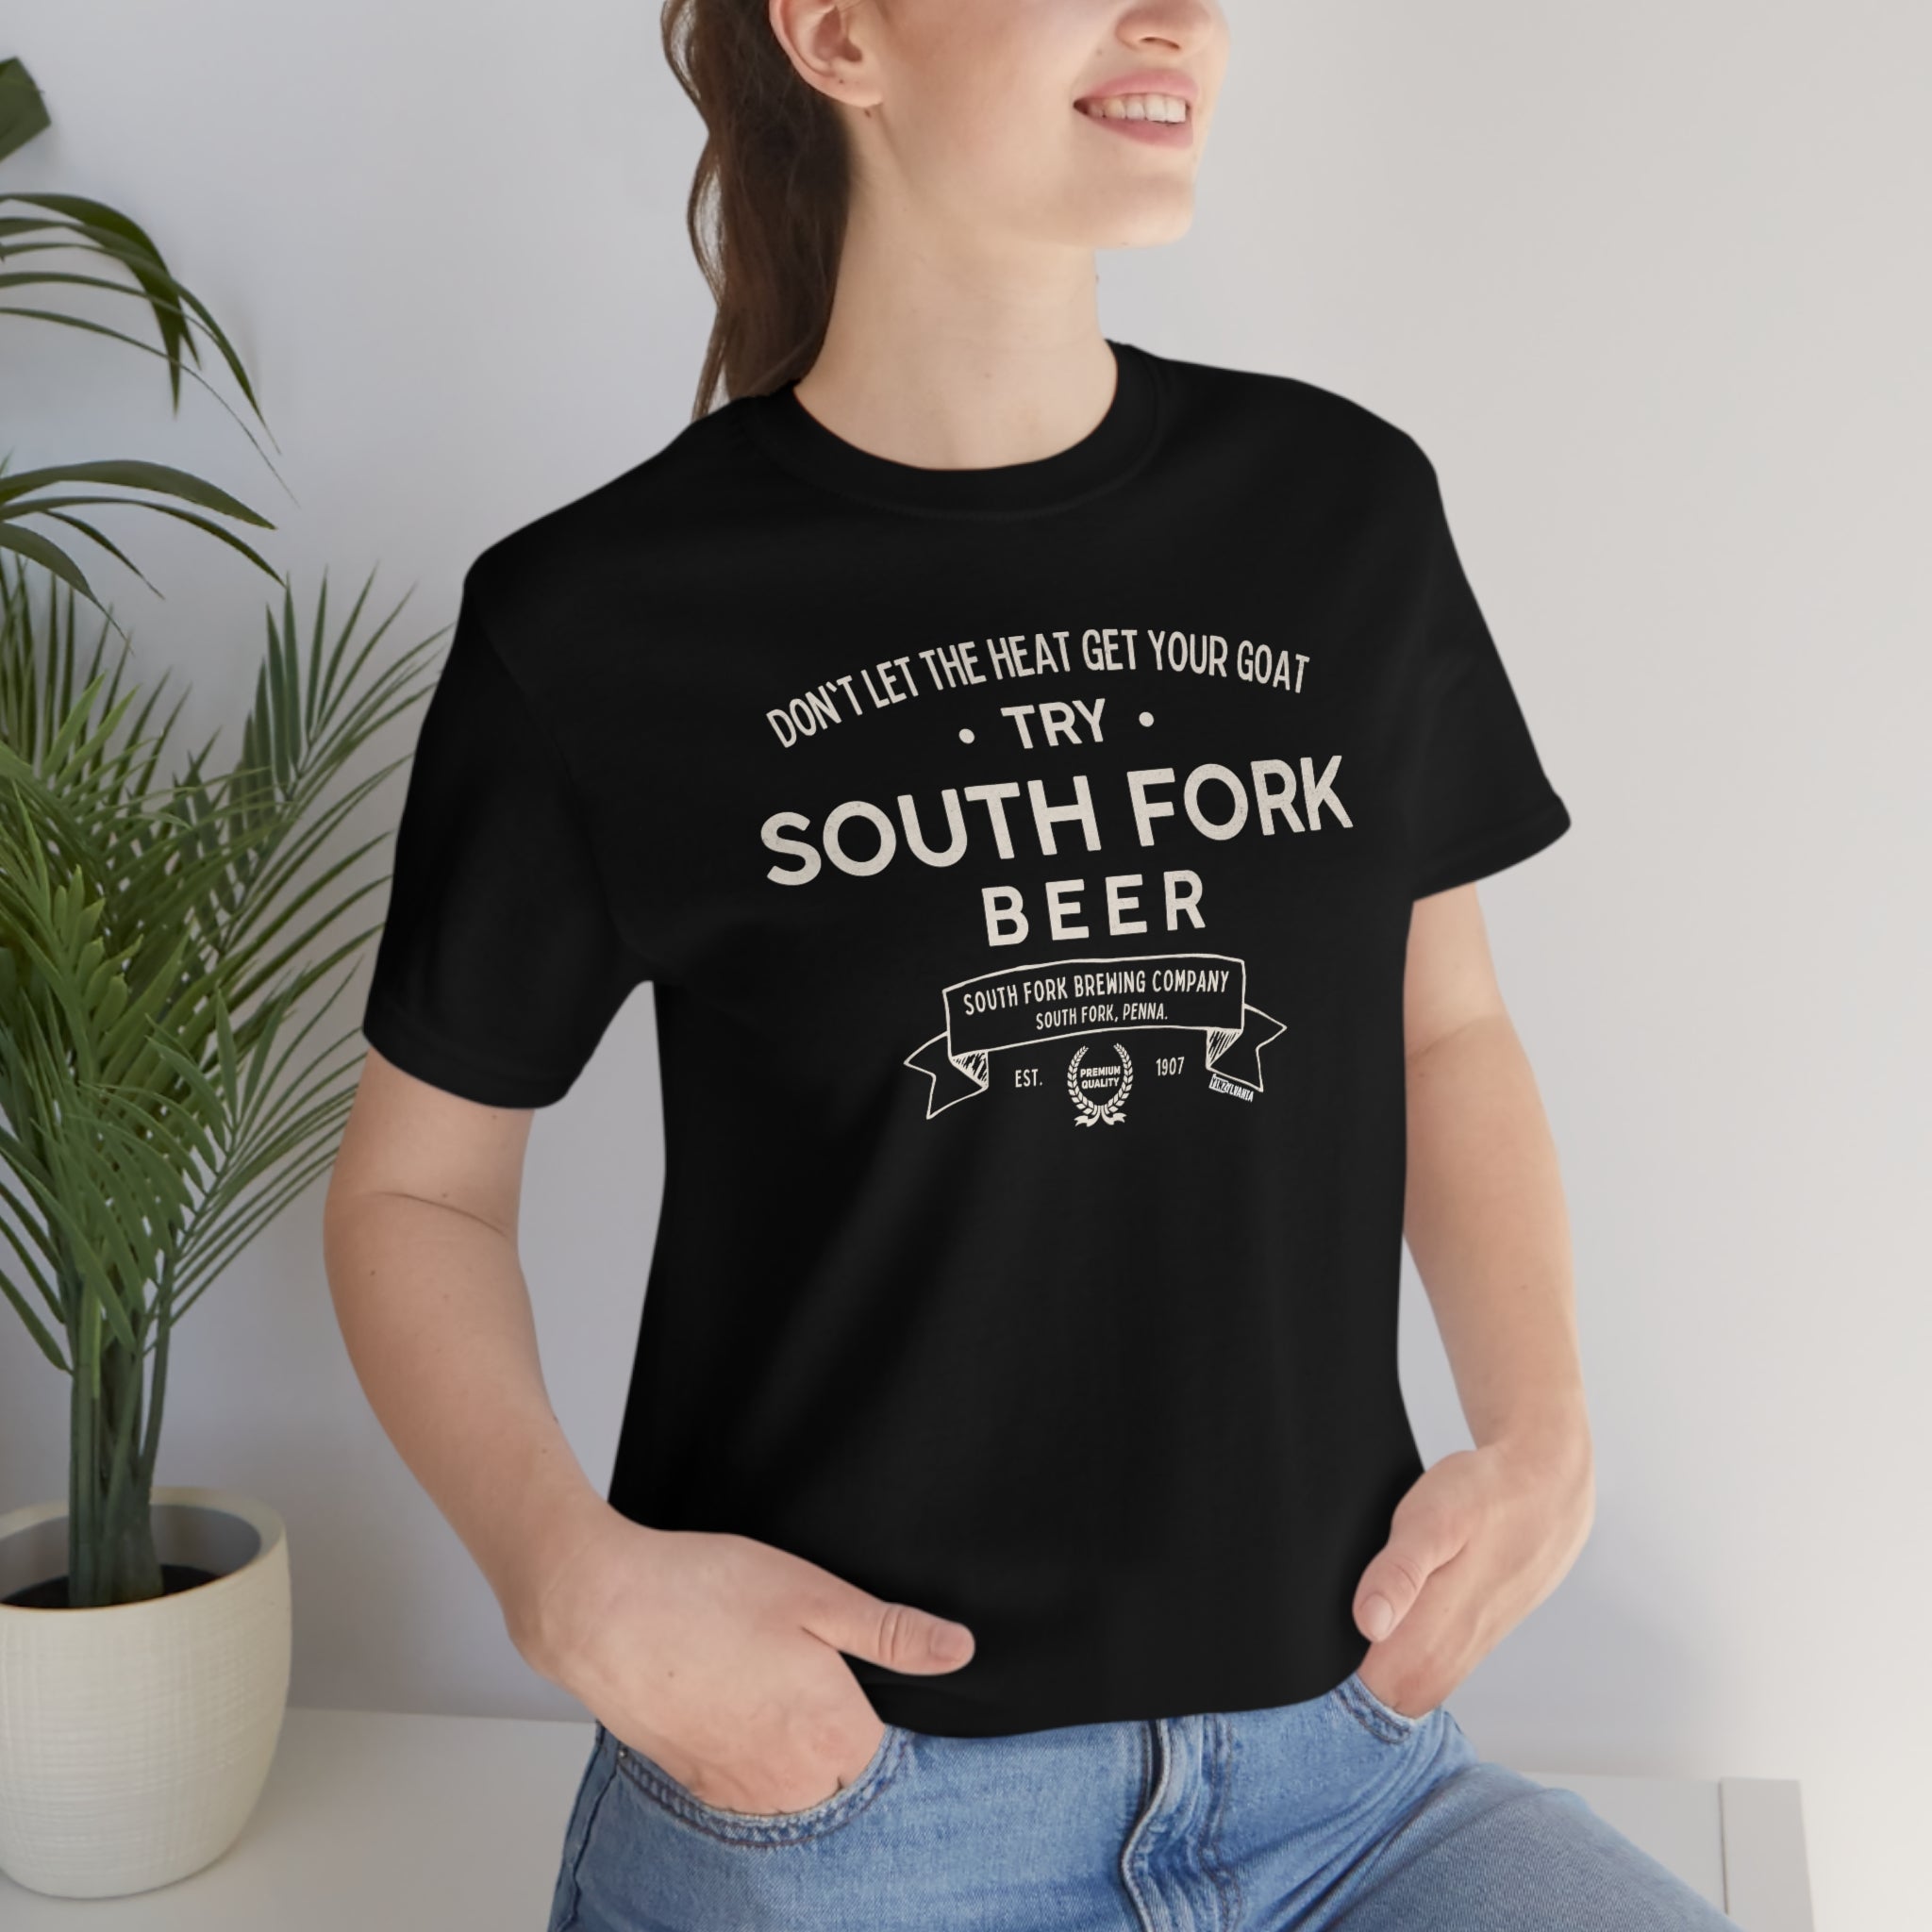 South Fork Beer - South Fork, PA - Yinzylvania